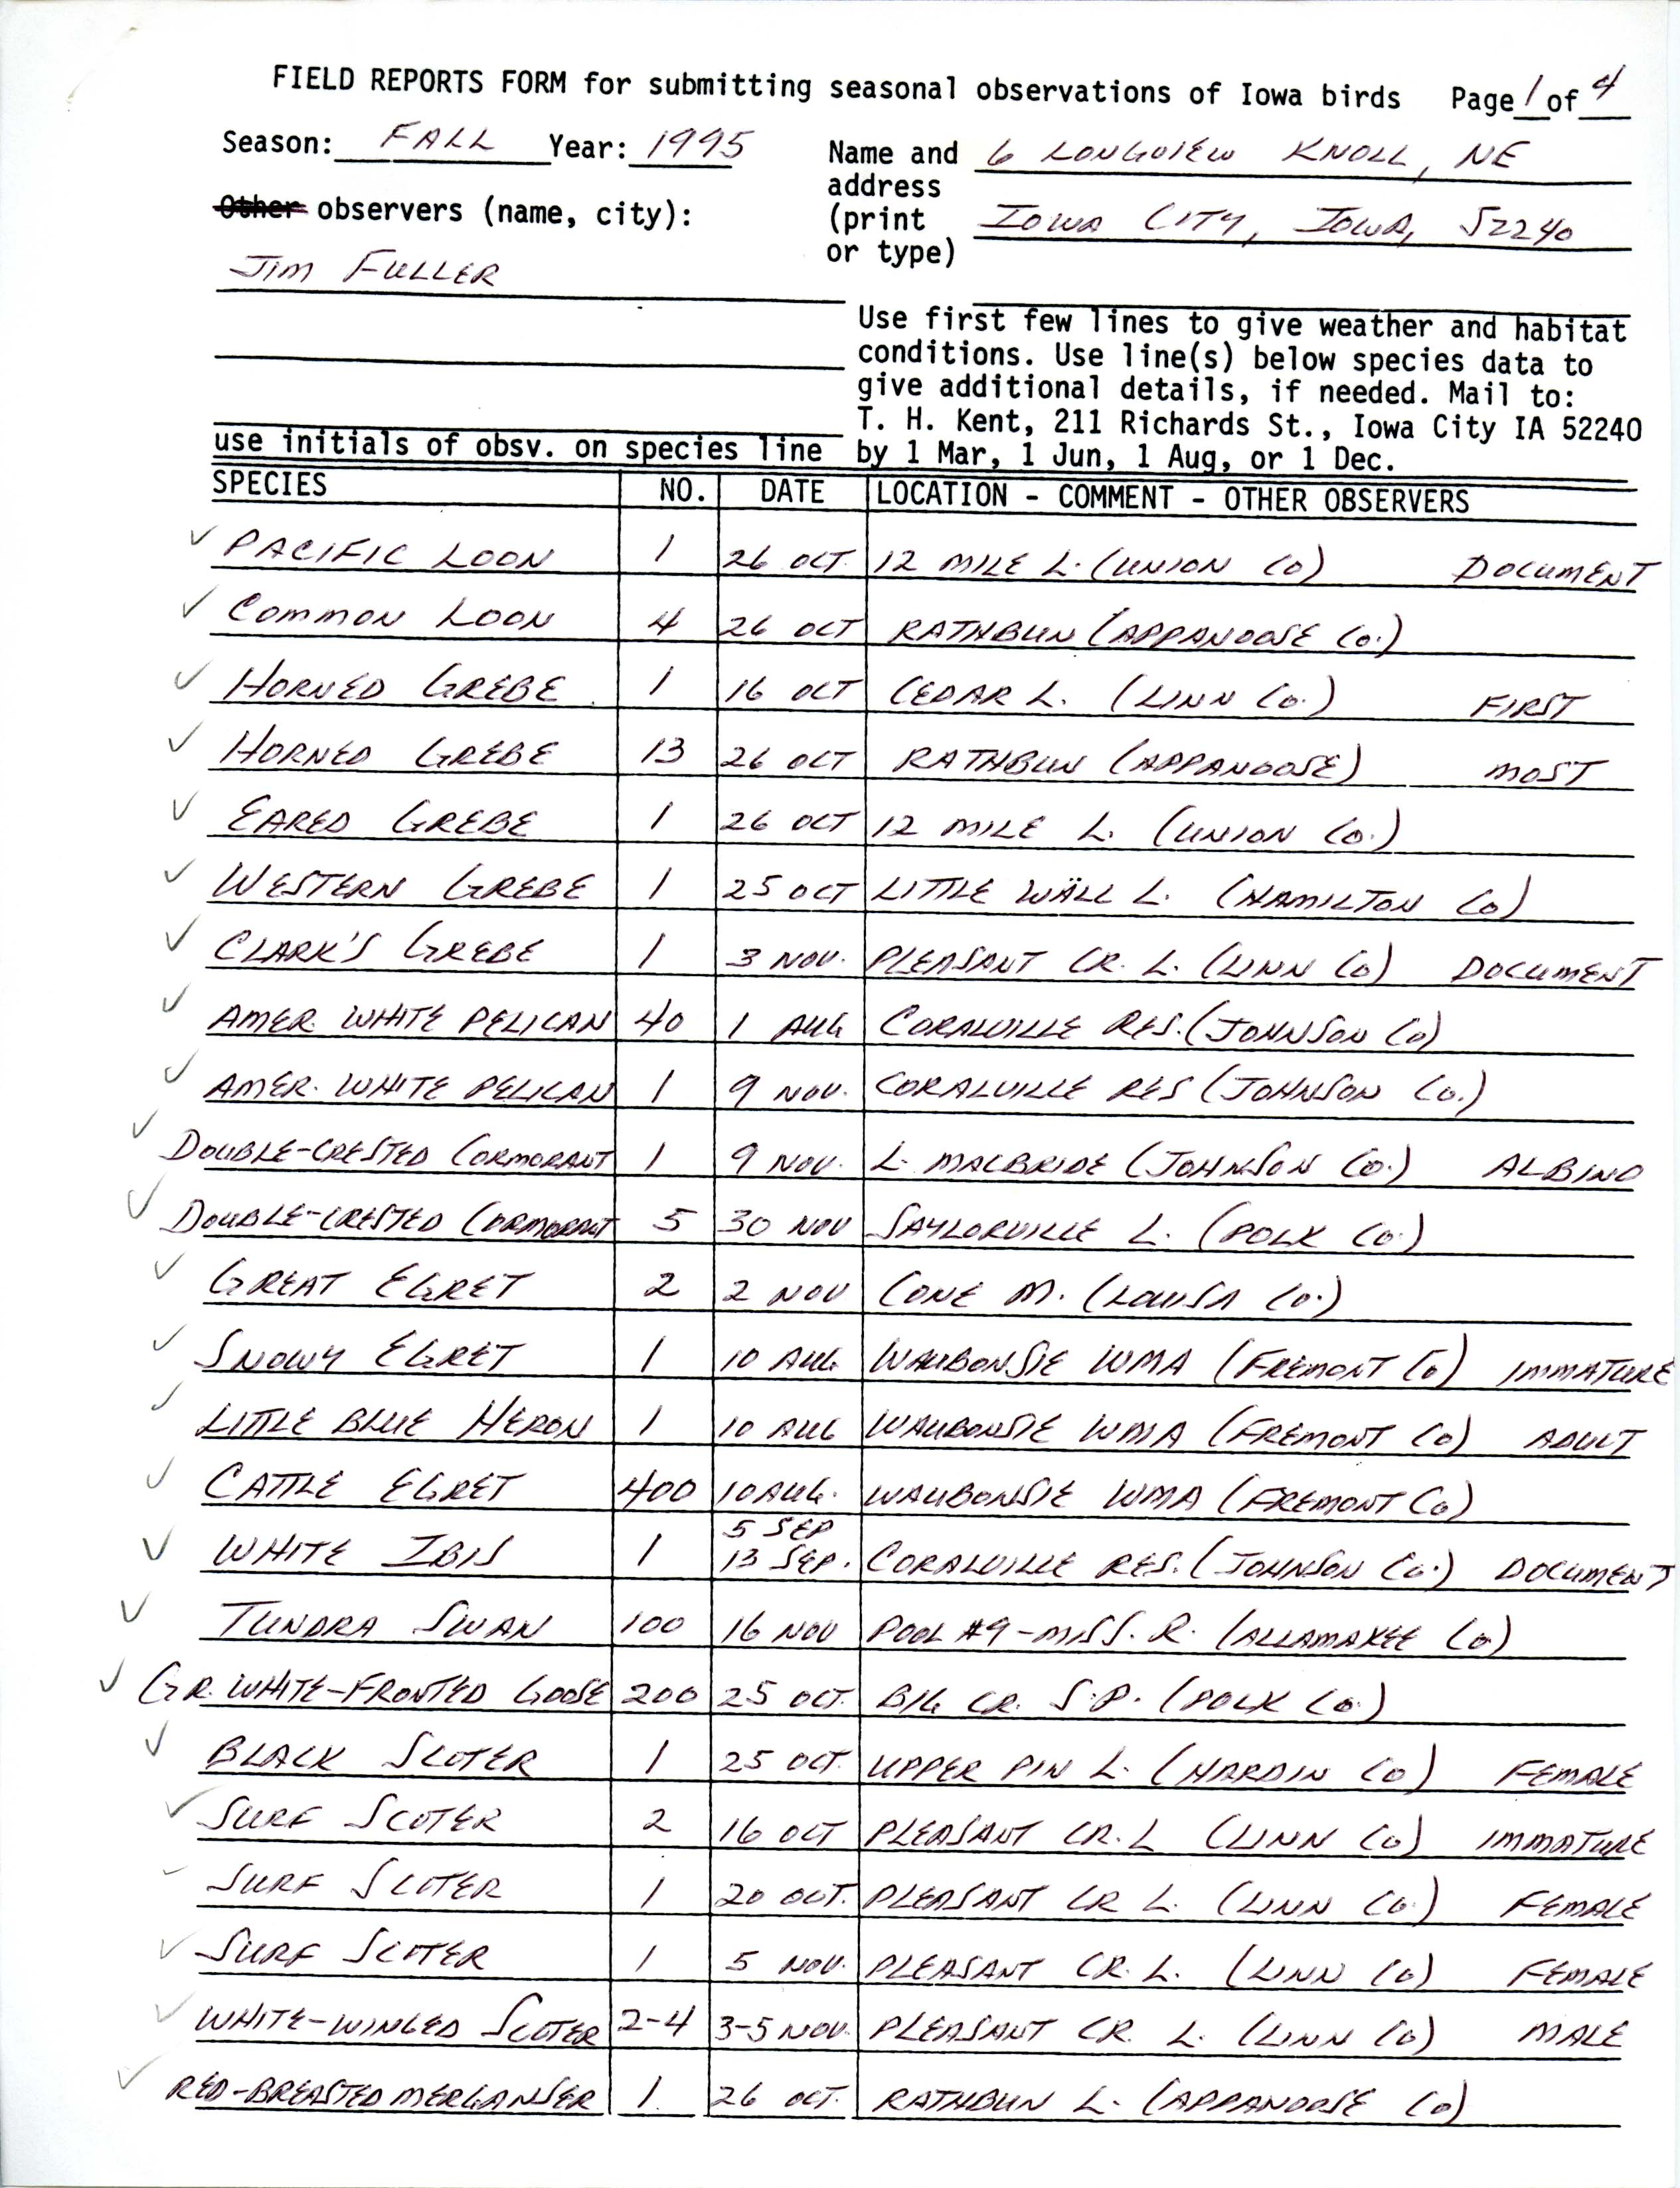 Field reports form for submitting seasonal observations of Iowa birds, James L. Fuller, fall 1995